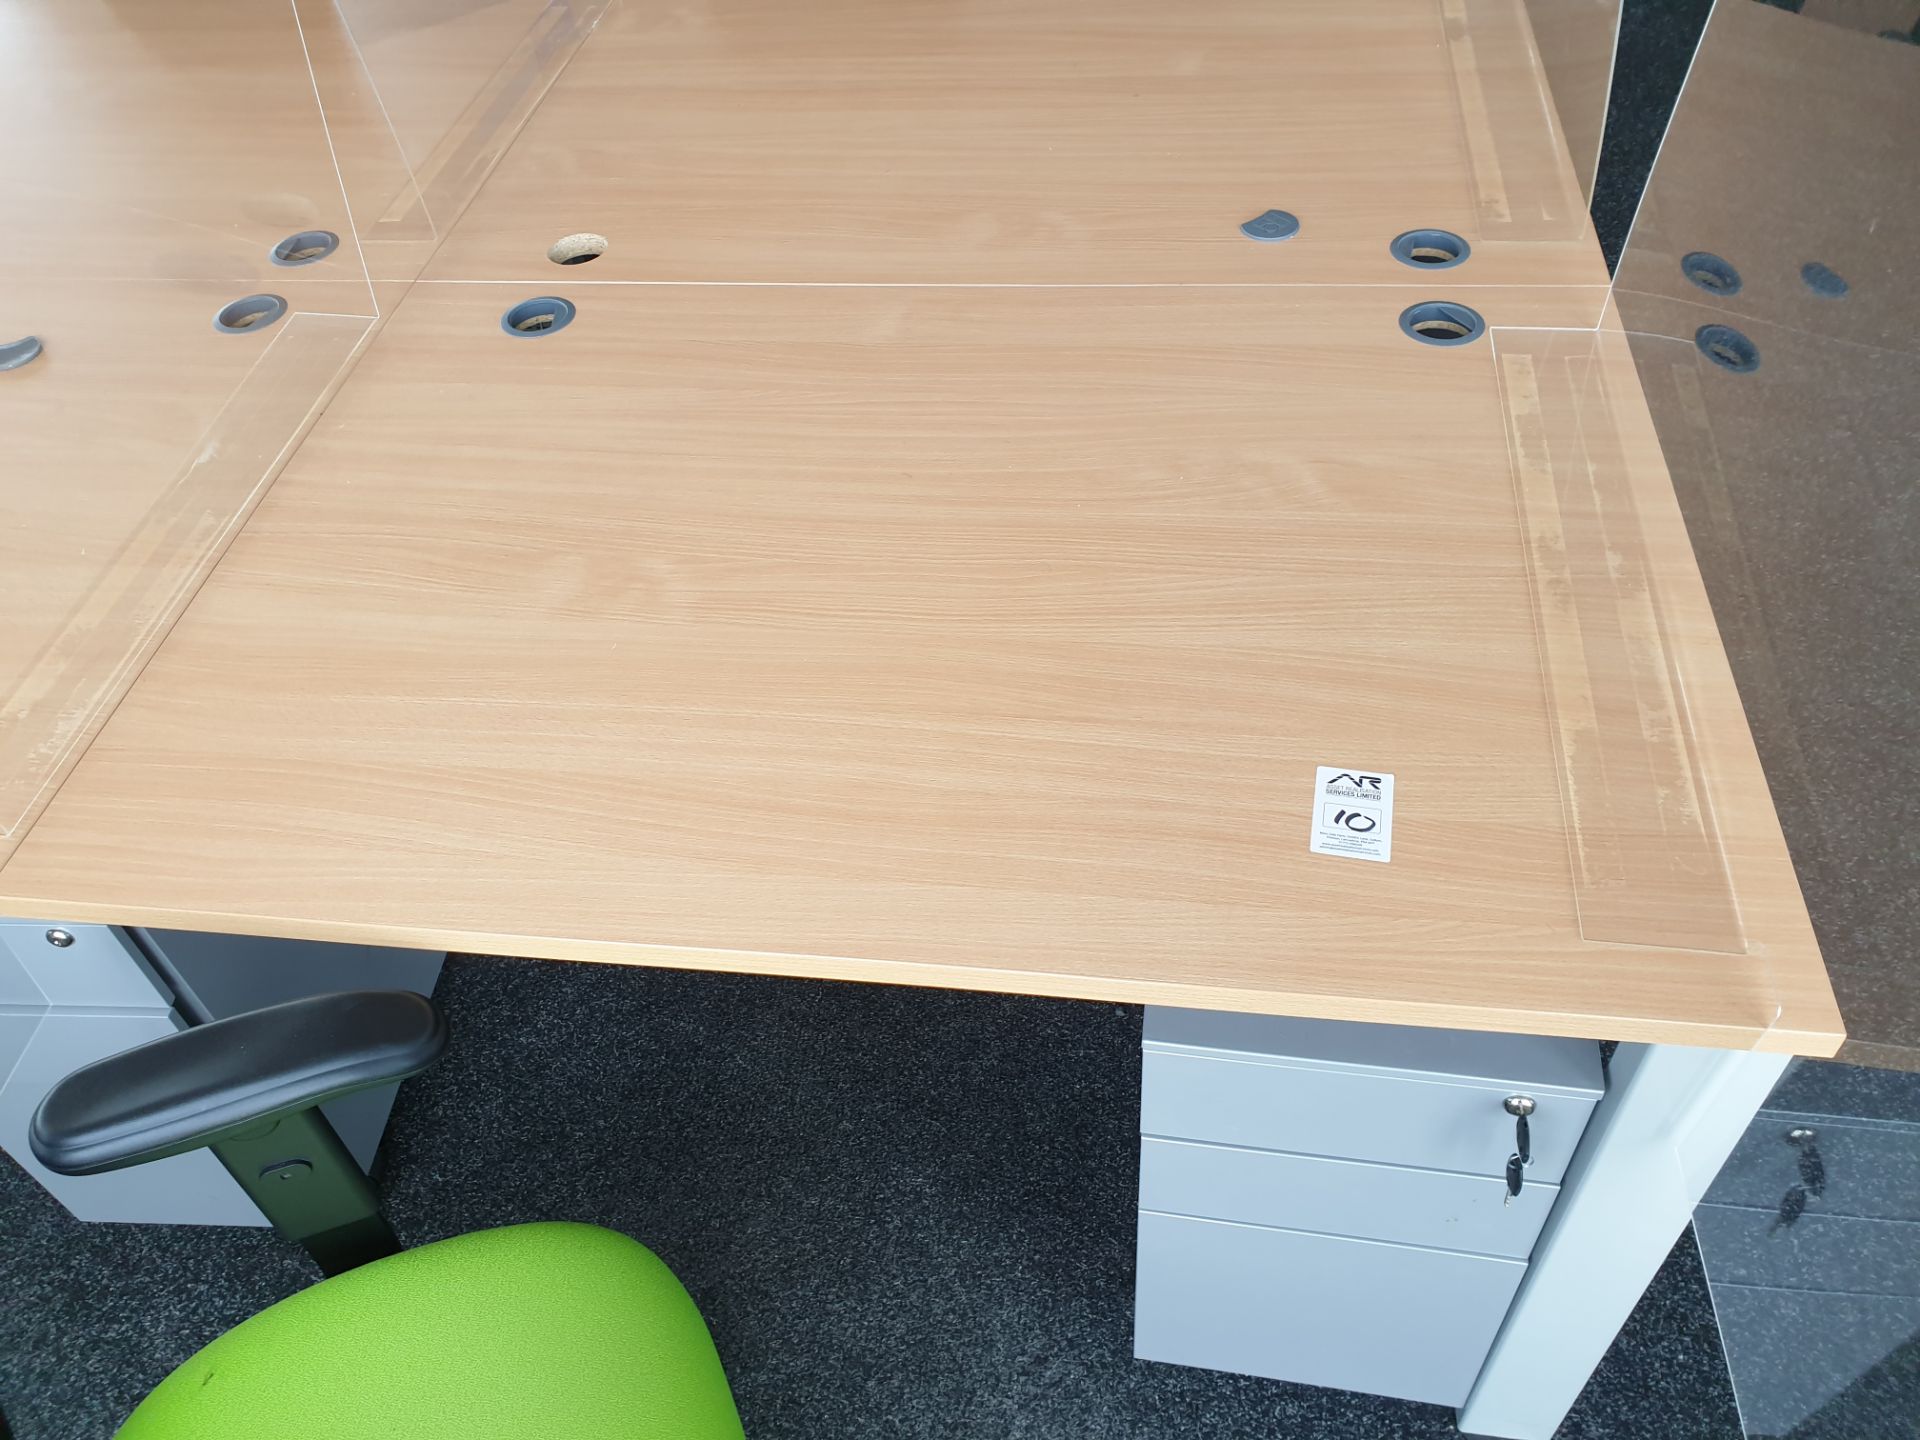 12 Person Workstation / Desks with covid screens - Image 4 of 4